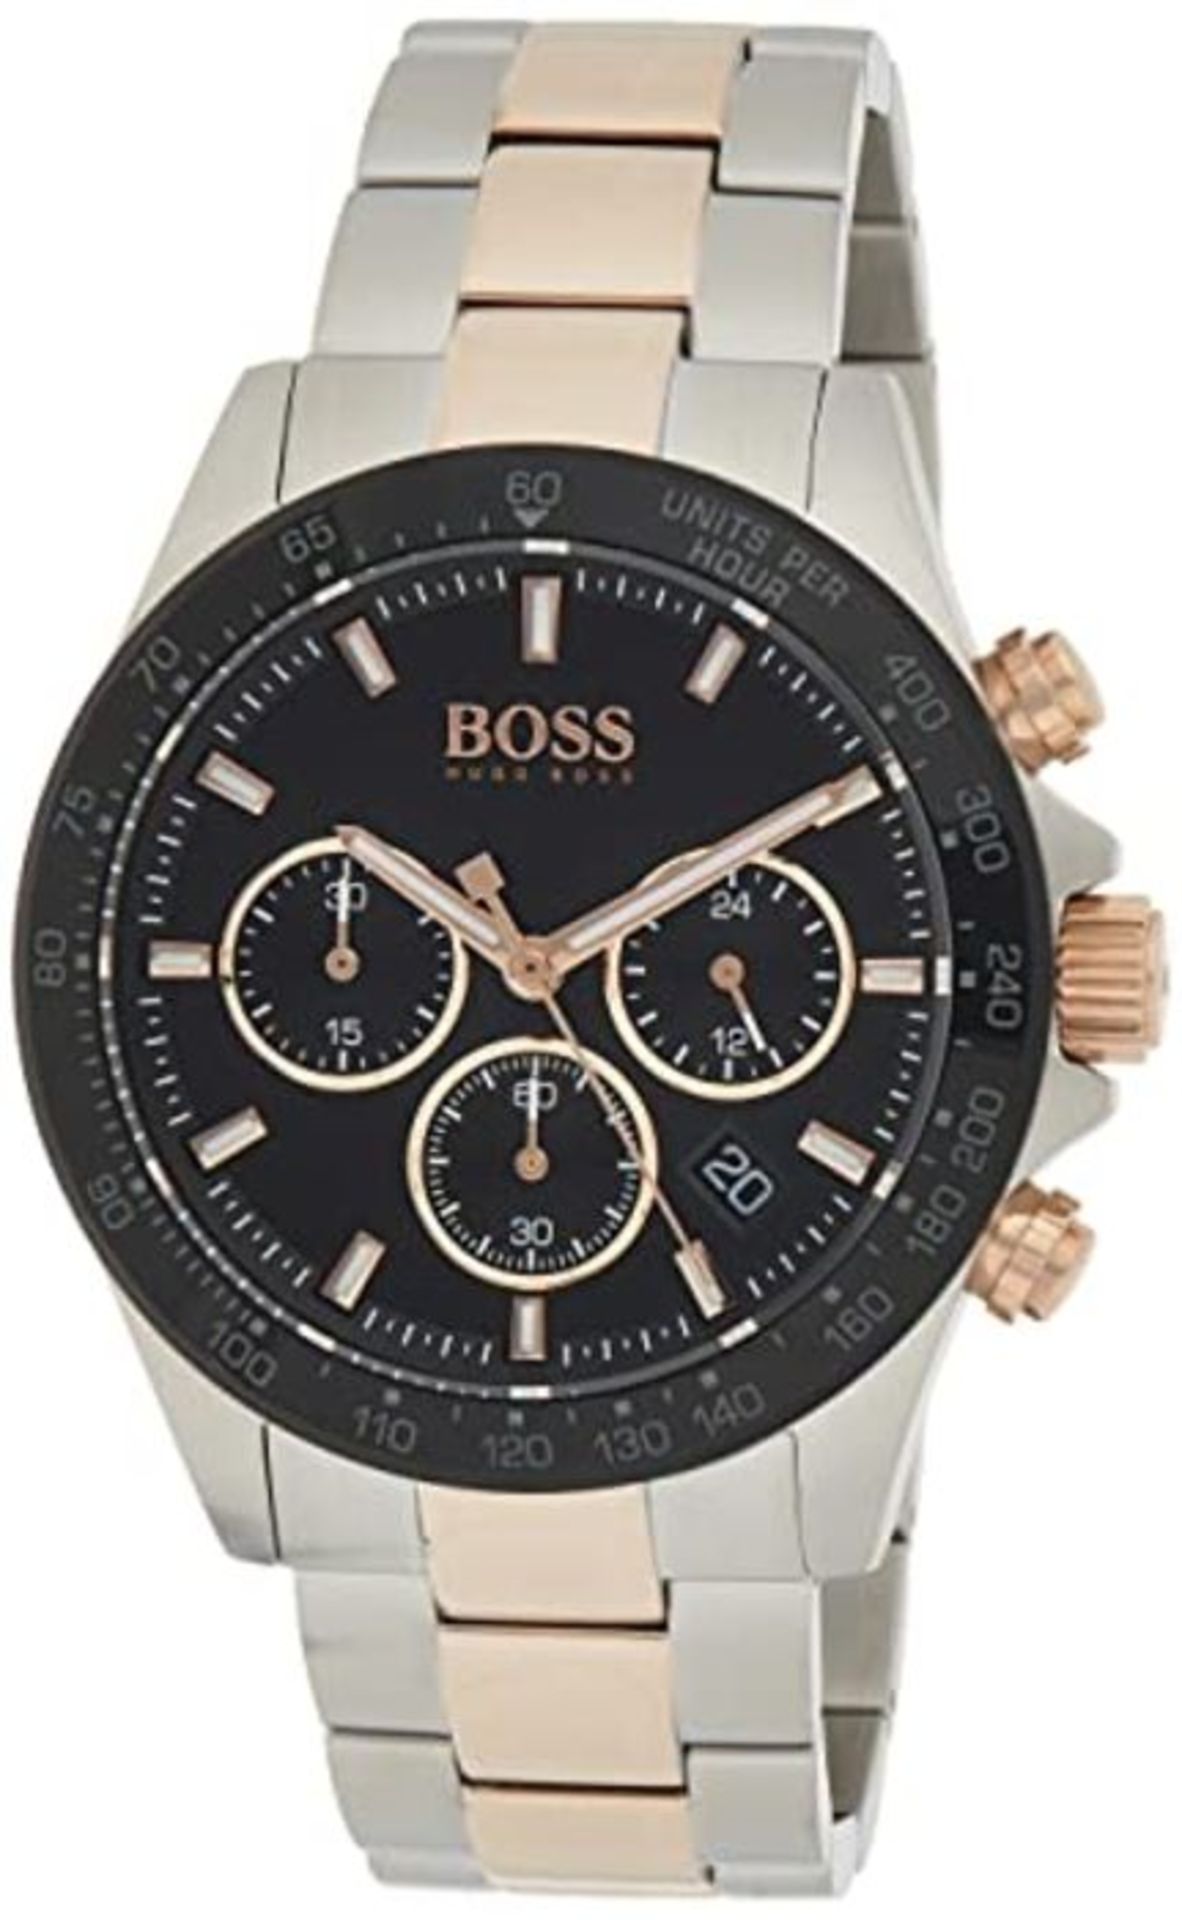 RRP £272.00 BOSS Men's Analogue Quartz Watch with Stainless Steel Strap 1513757